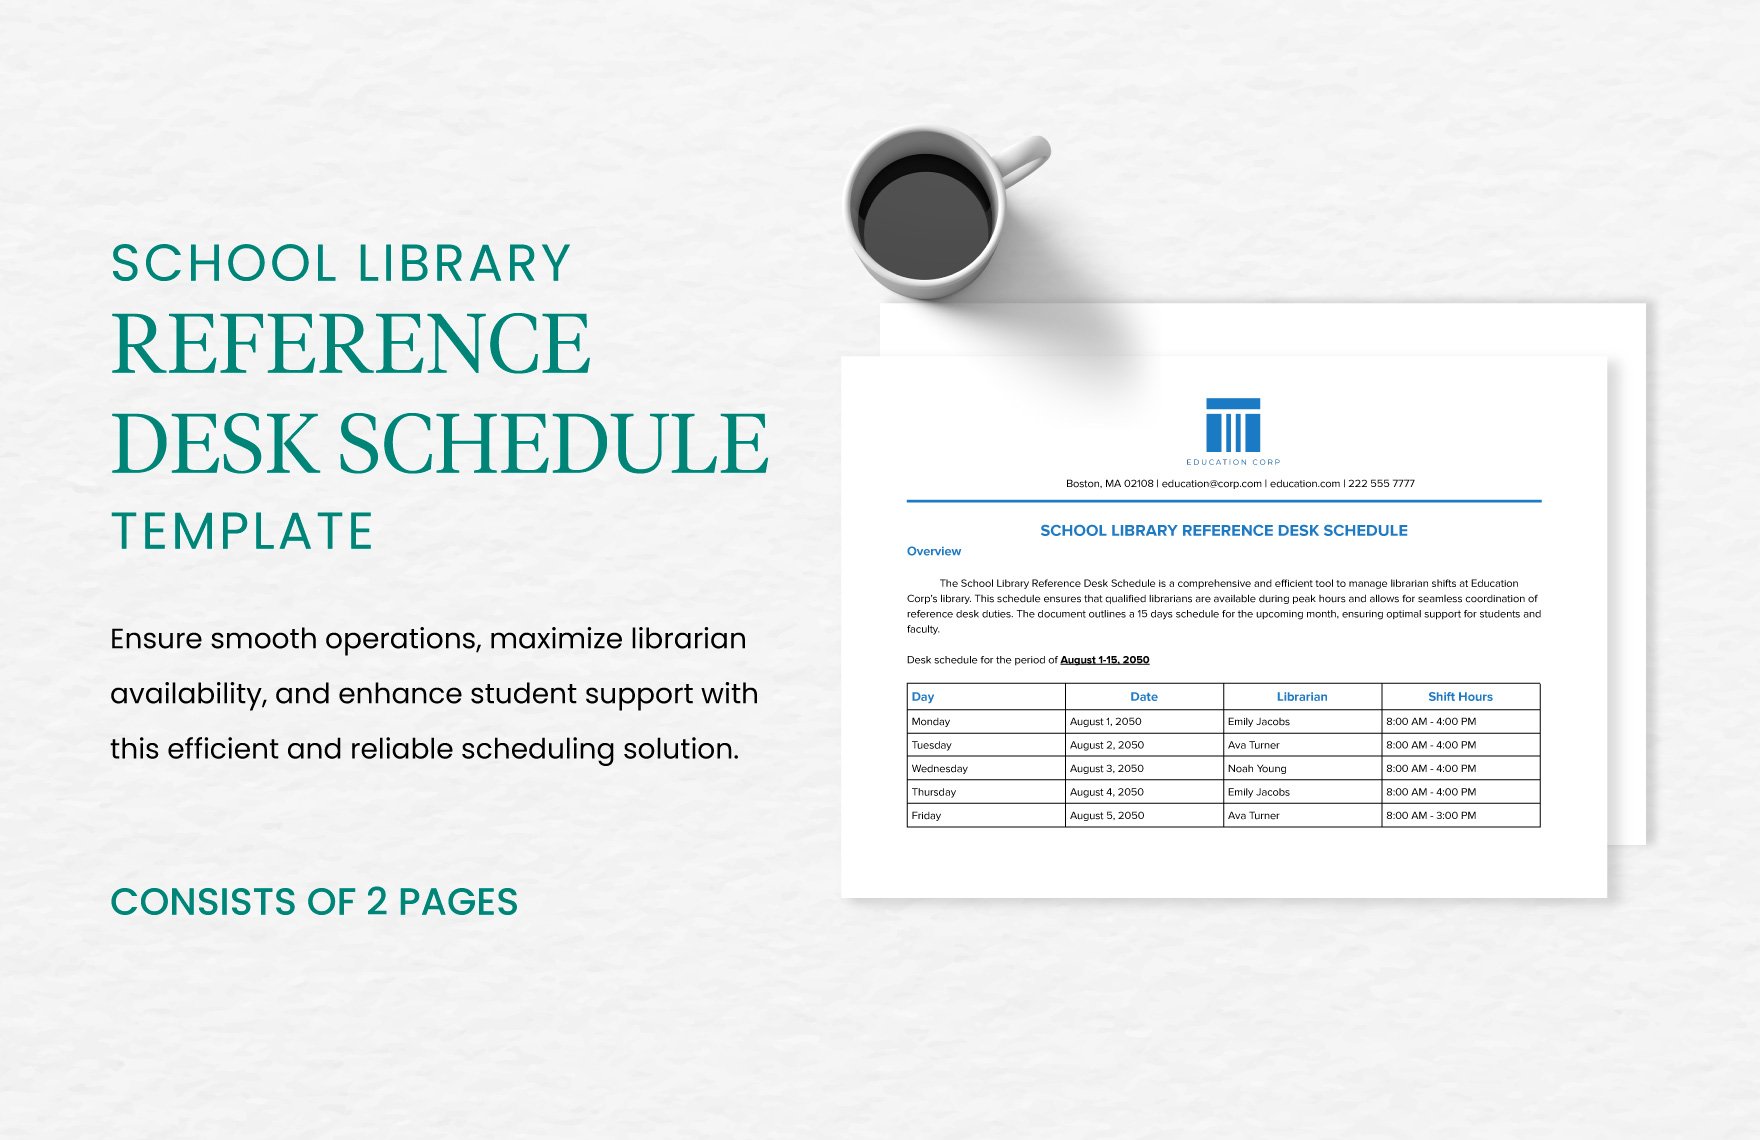 School Library Reference Desk Schedule Template